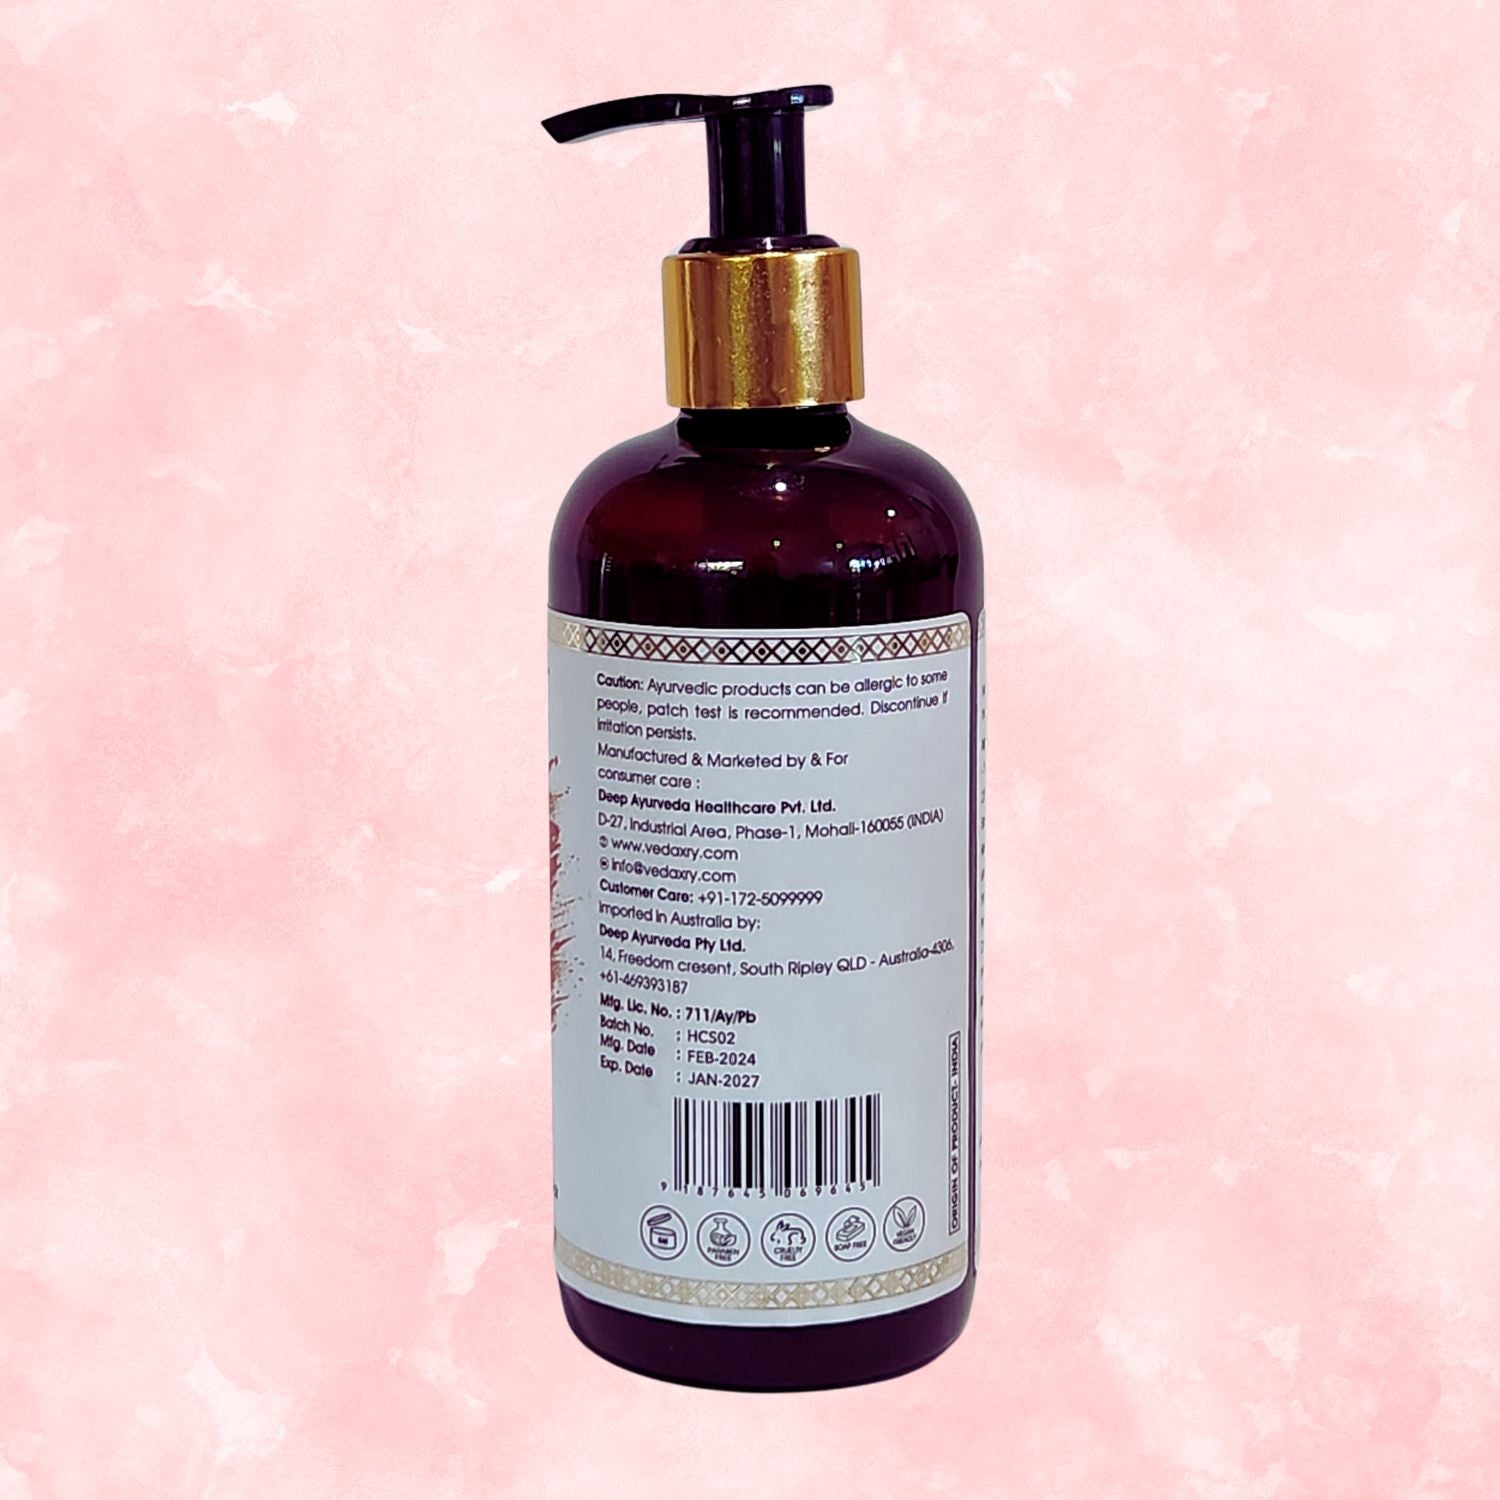 vedaxry hair cleanser for normal hair back